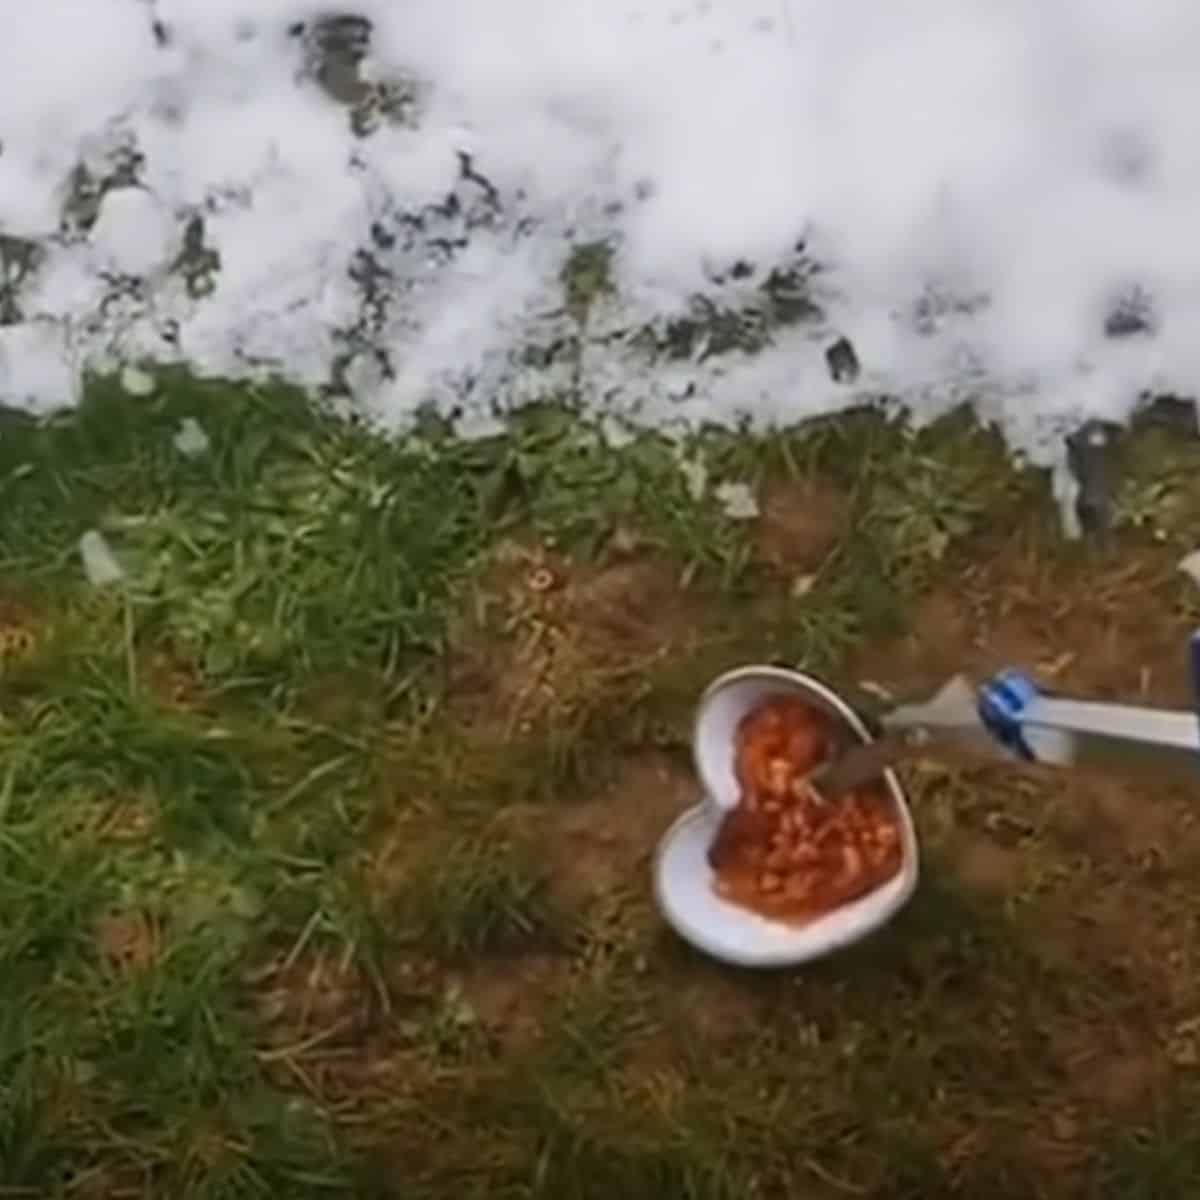 cat food in a bowl on the ground